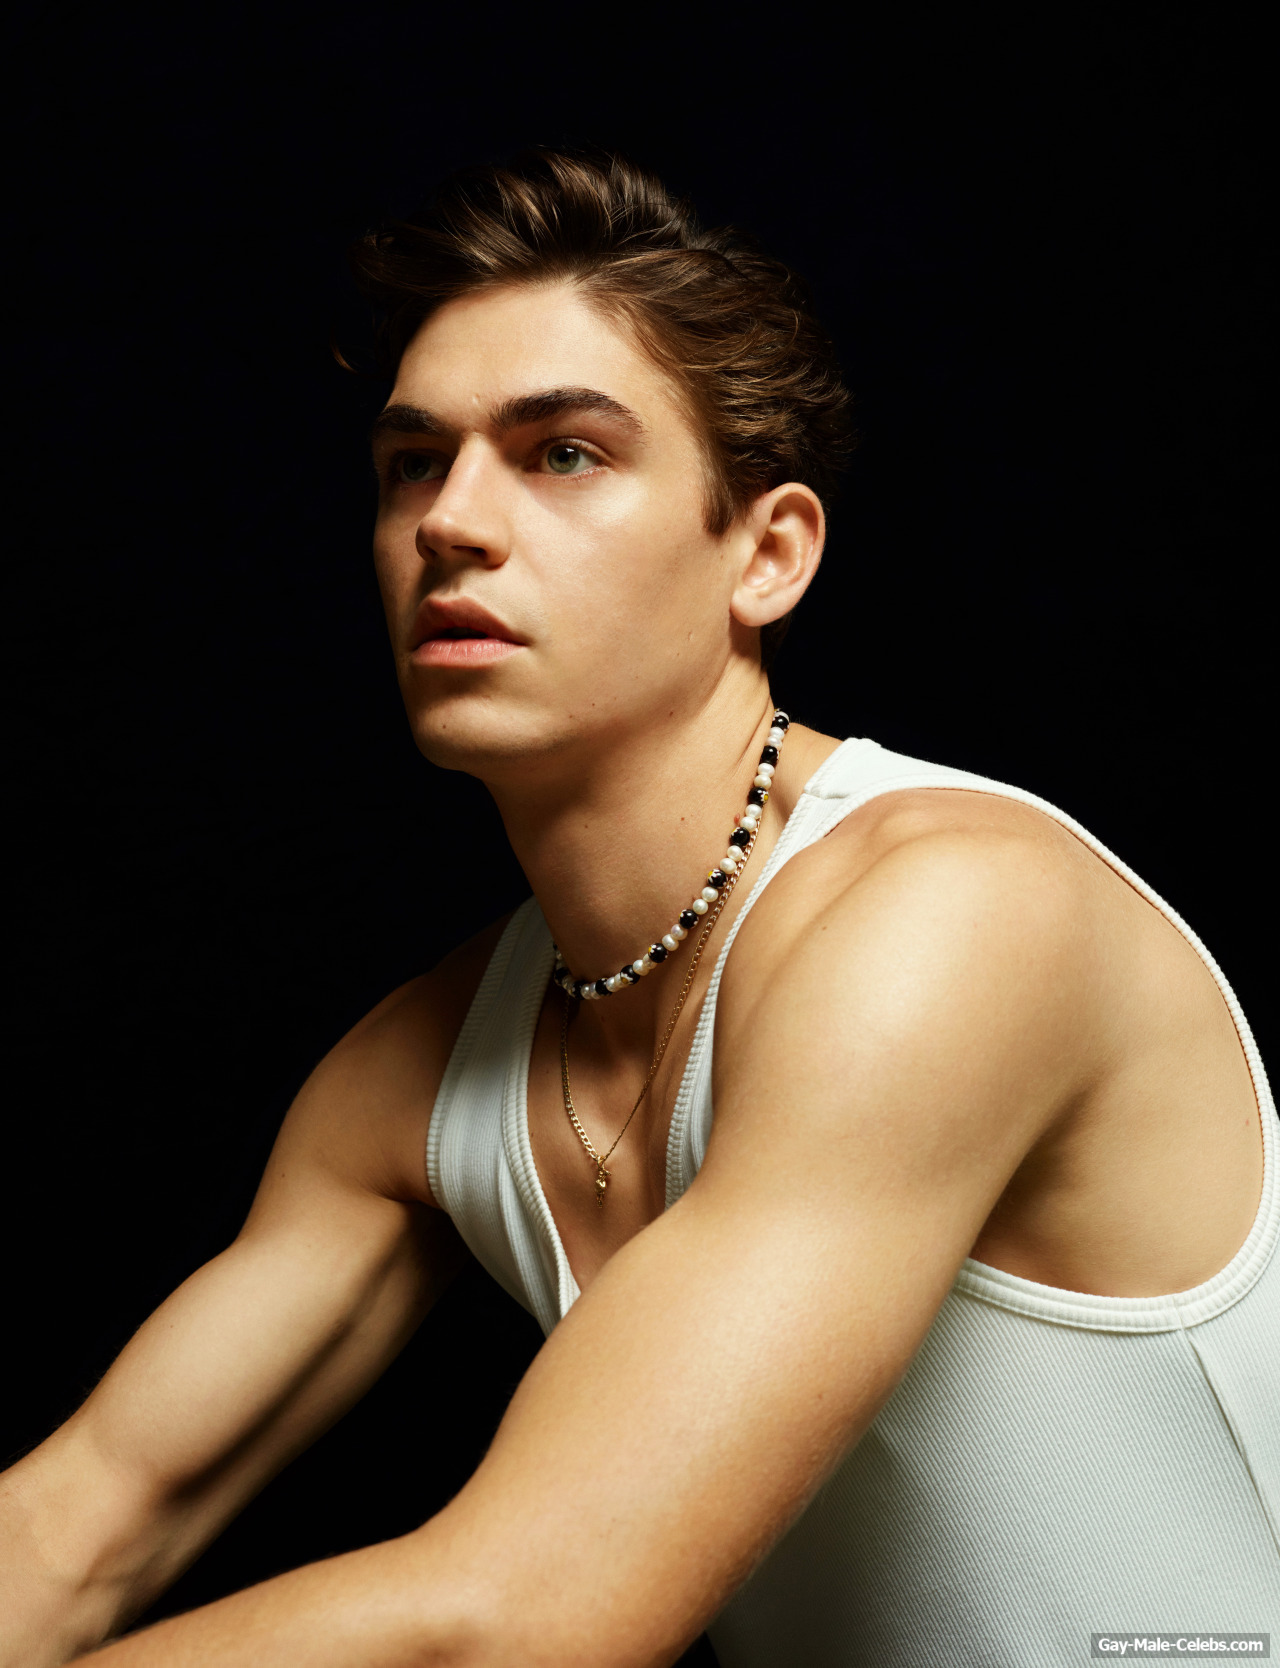 Hero Fiennes Tiffin Shirtless And Sexy For HERO